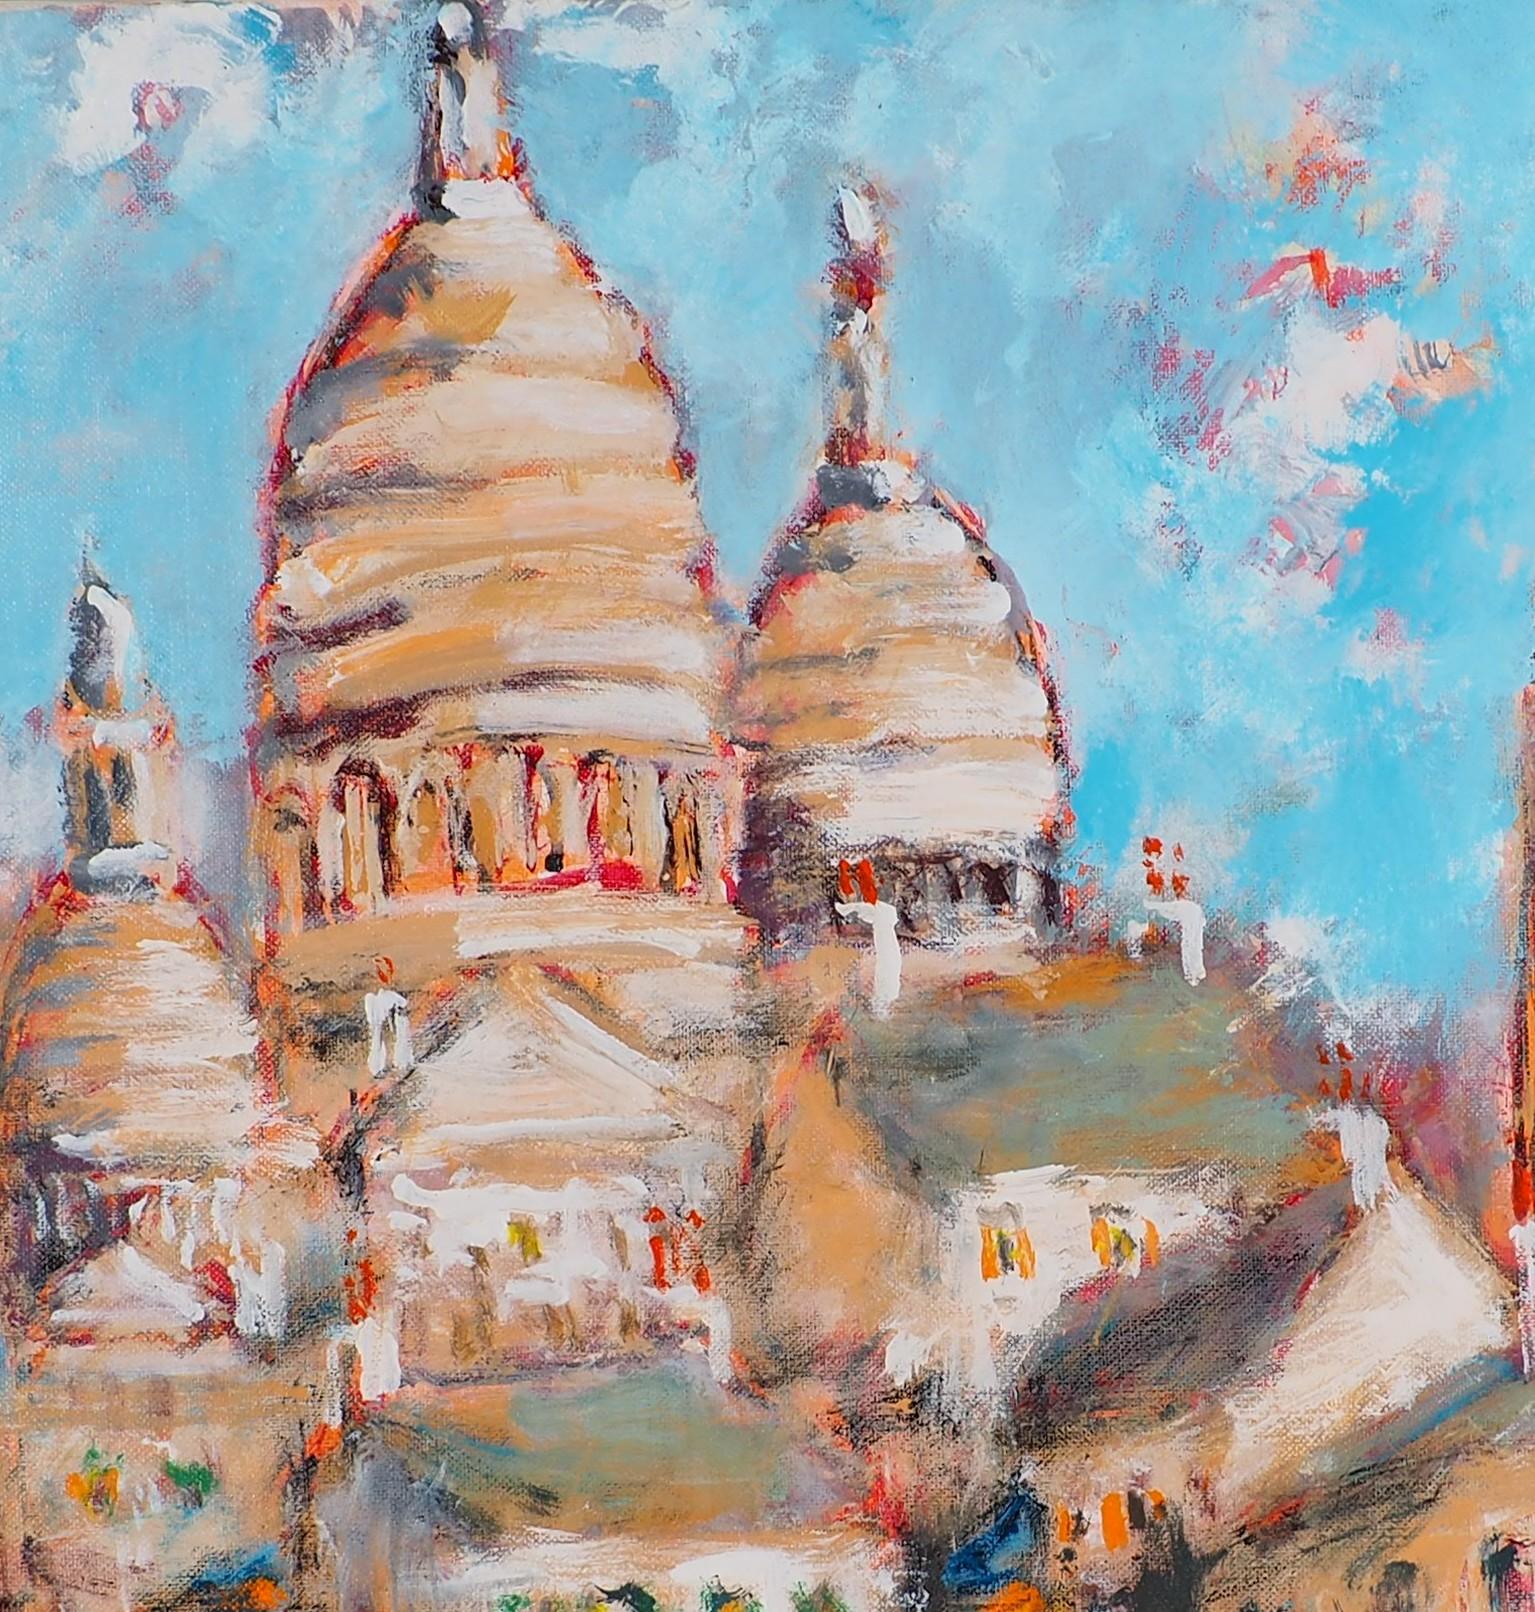 Urbain HUCHET
Paris : Fun Fair in Montmartre (Sacre Coeur)

Original oil on canvas
Signed bottom right
Titled on the back
On canvas 81 x 65 cm (c. 32 x 26 in)
Presented in wood frame 99 x 83 cm (c 40 x 34 in)

Excellent condition, minor defects to